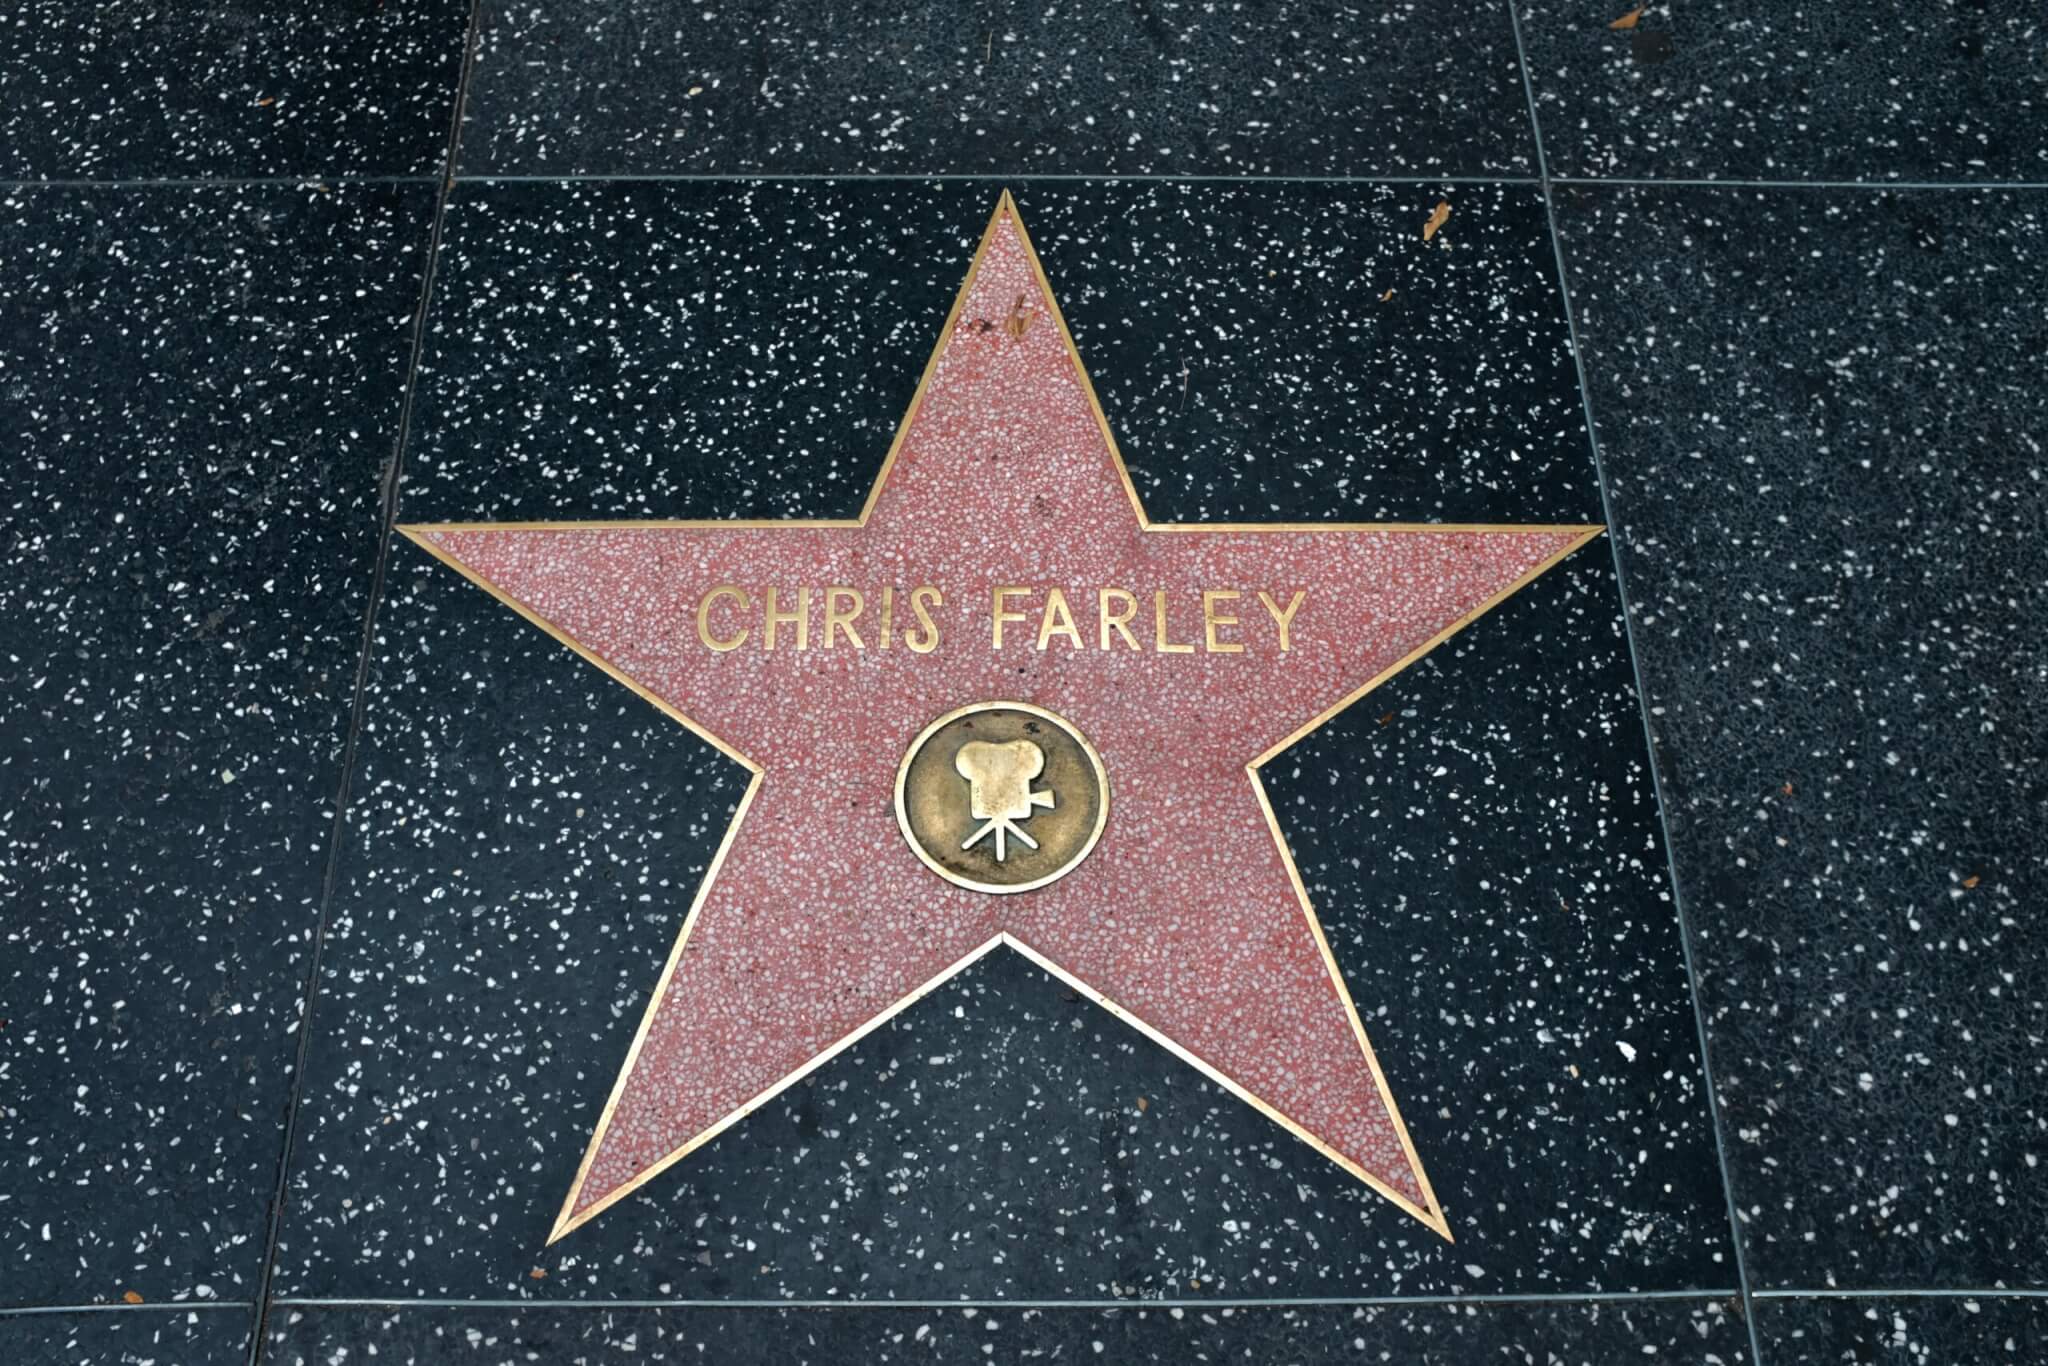 Chris Farley's star on the Hollywood Walk of Fame